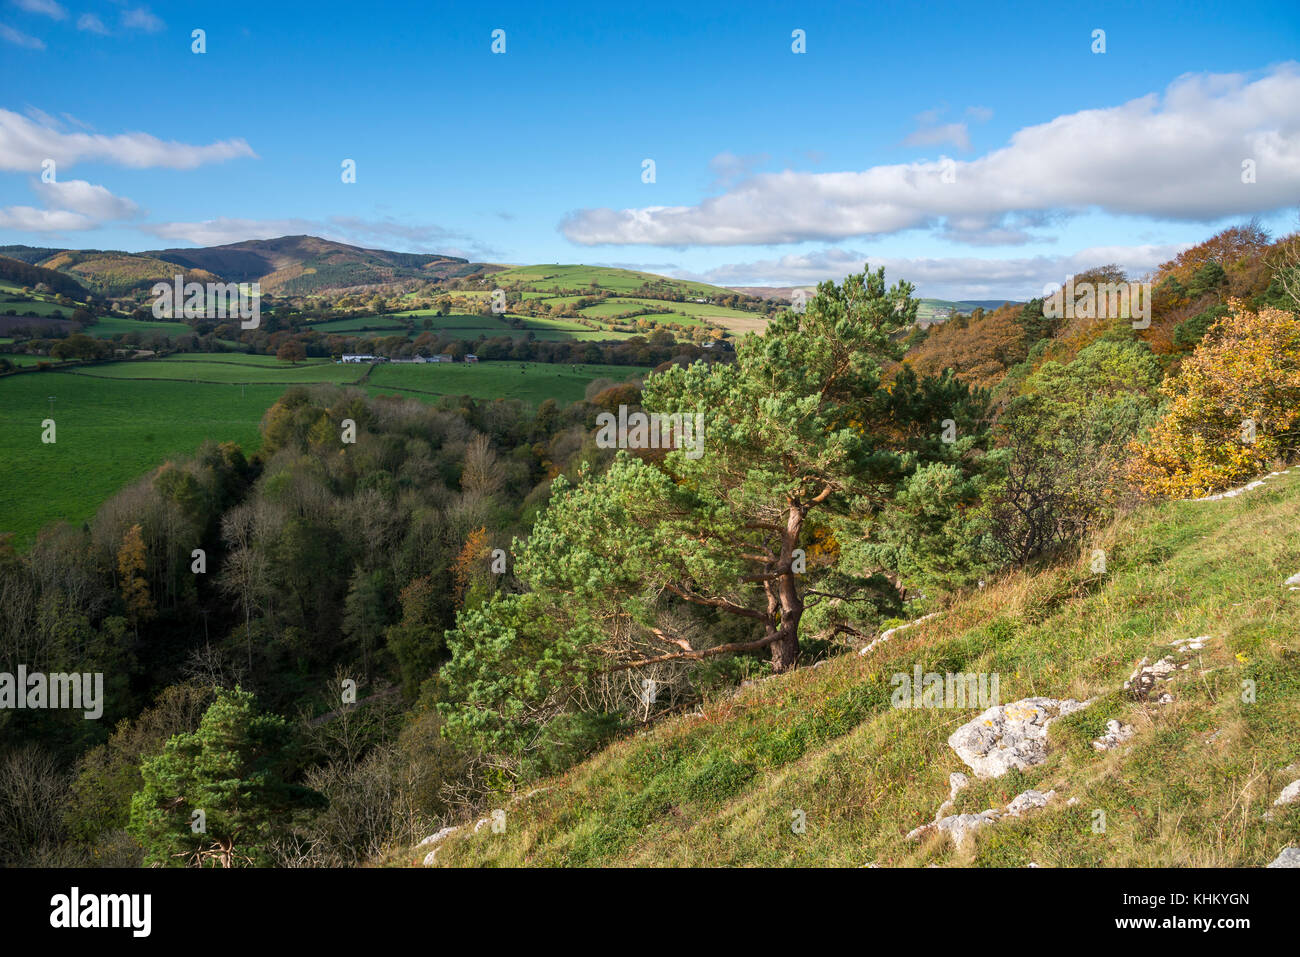 Autumn scenery at Loggerheads country park, Mold, North Wales. Beautiful view towards Moel Famau. Stock Photo